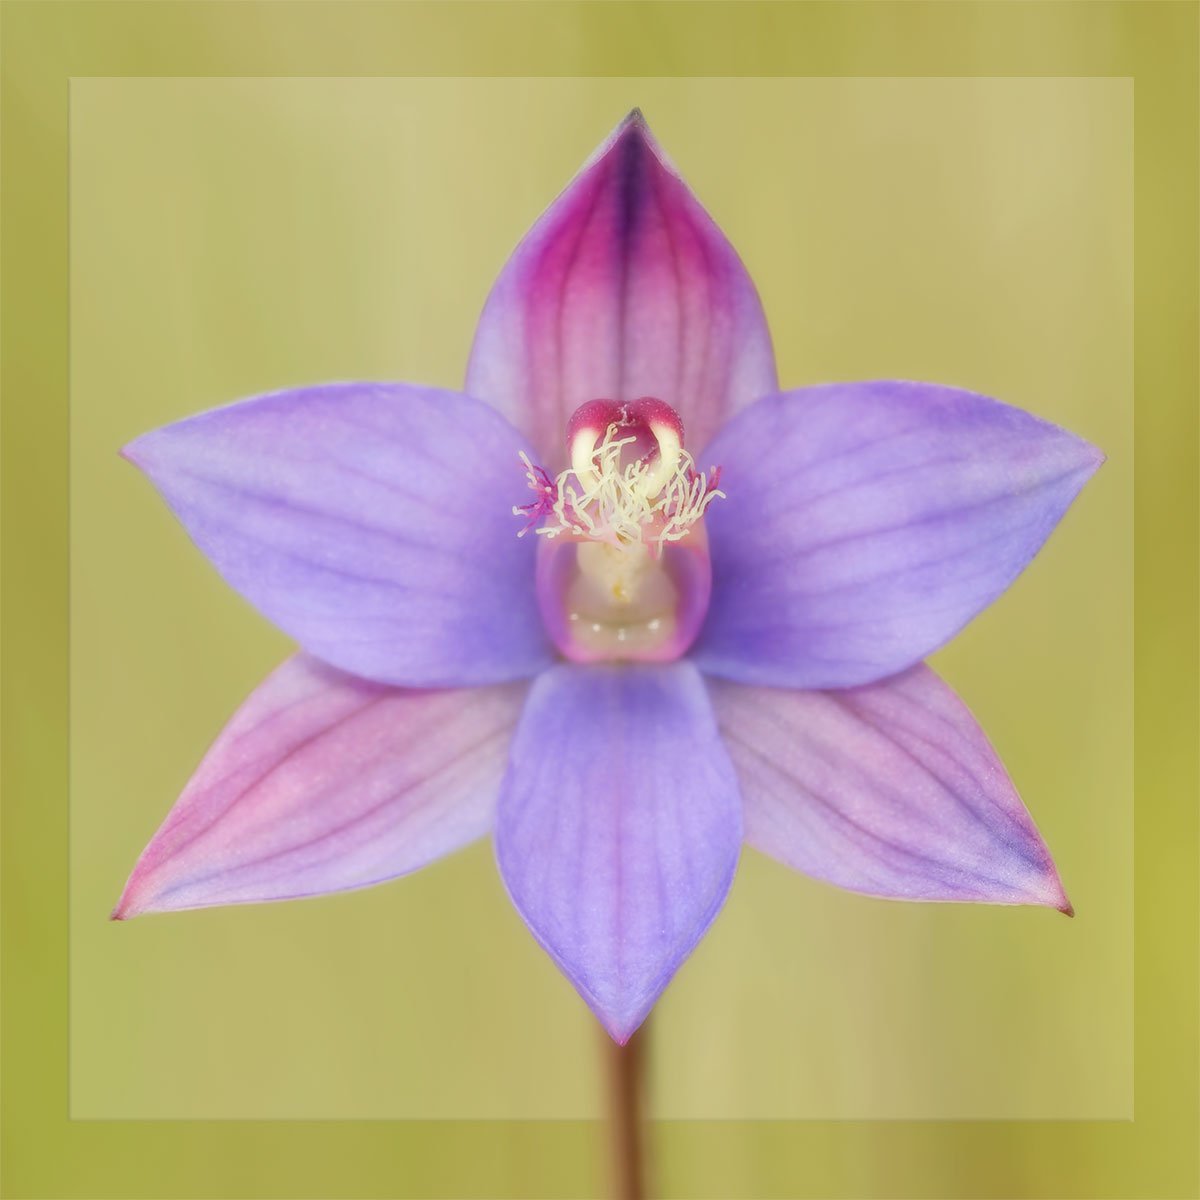 Beasts & Blossoms Nature Photography & Handmade Jewellery - every purchase supports wildlife conservation (image: plum sun orchid)